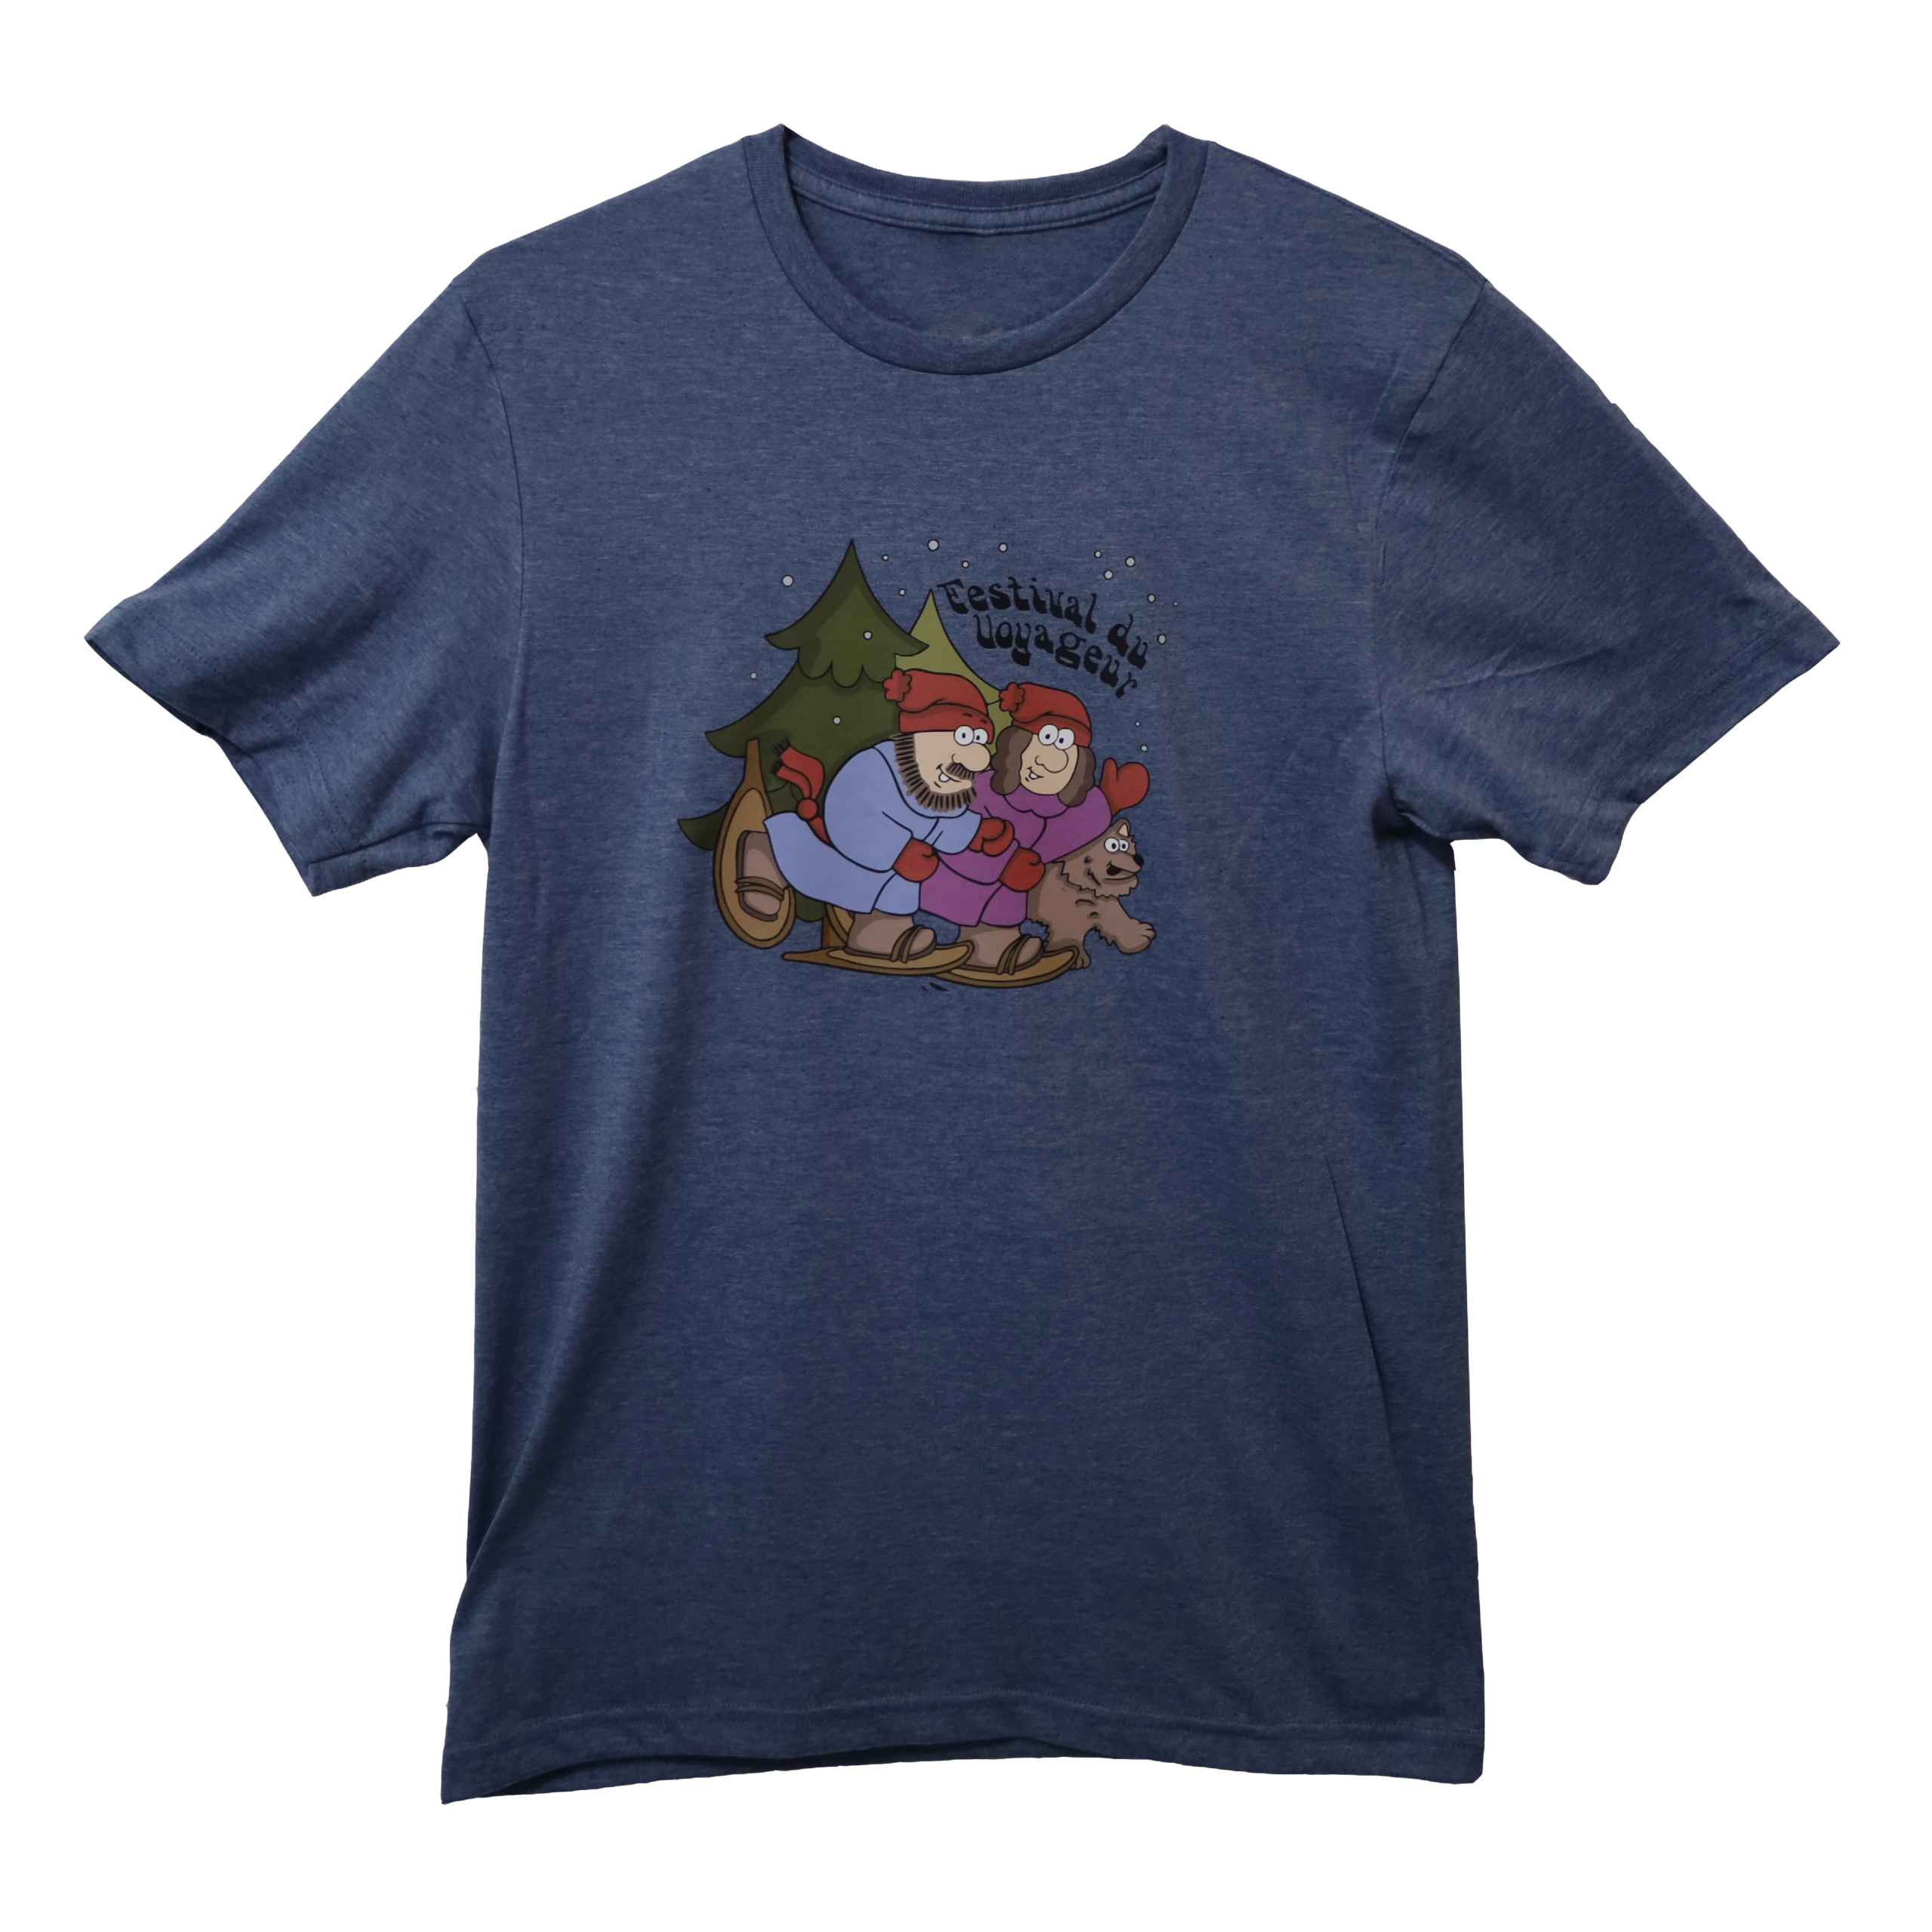 Featured image for “SNOWSHOE T-SHIRT”